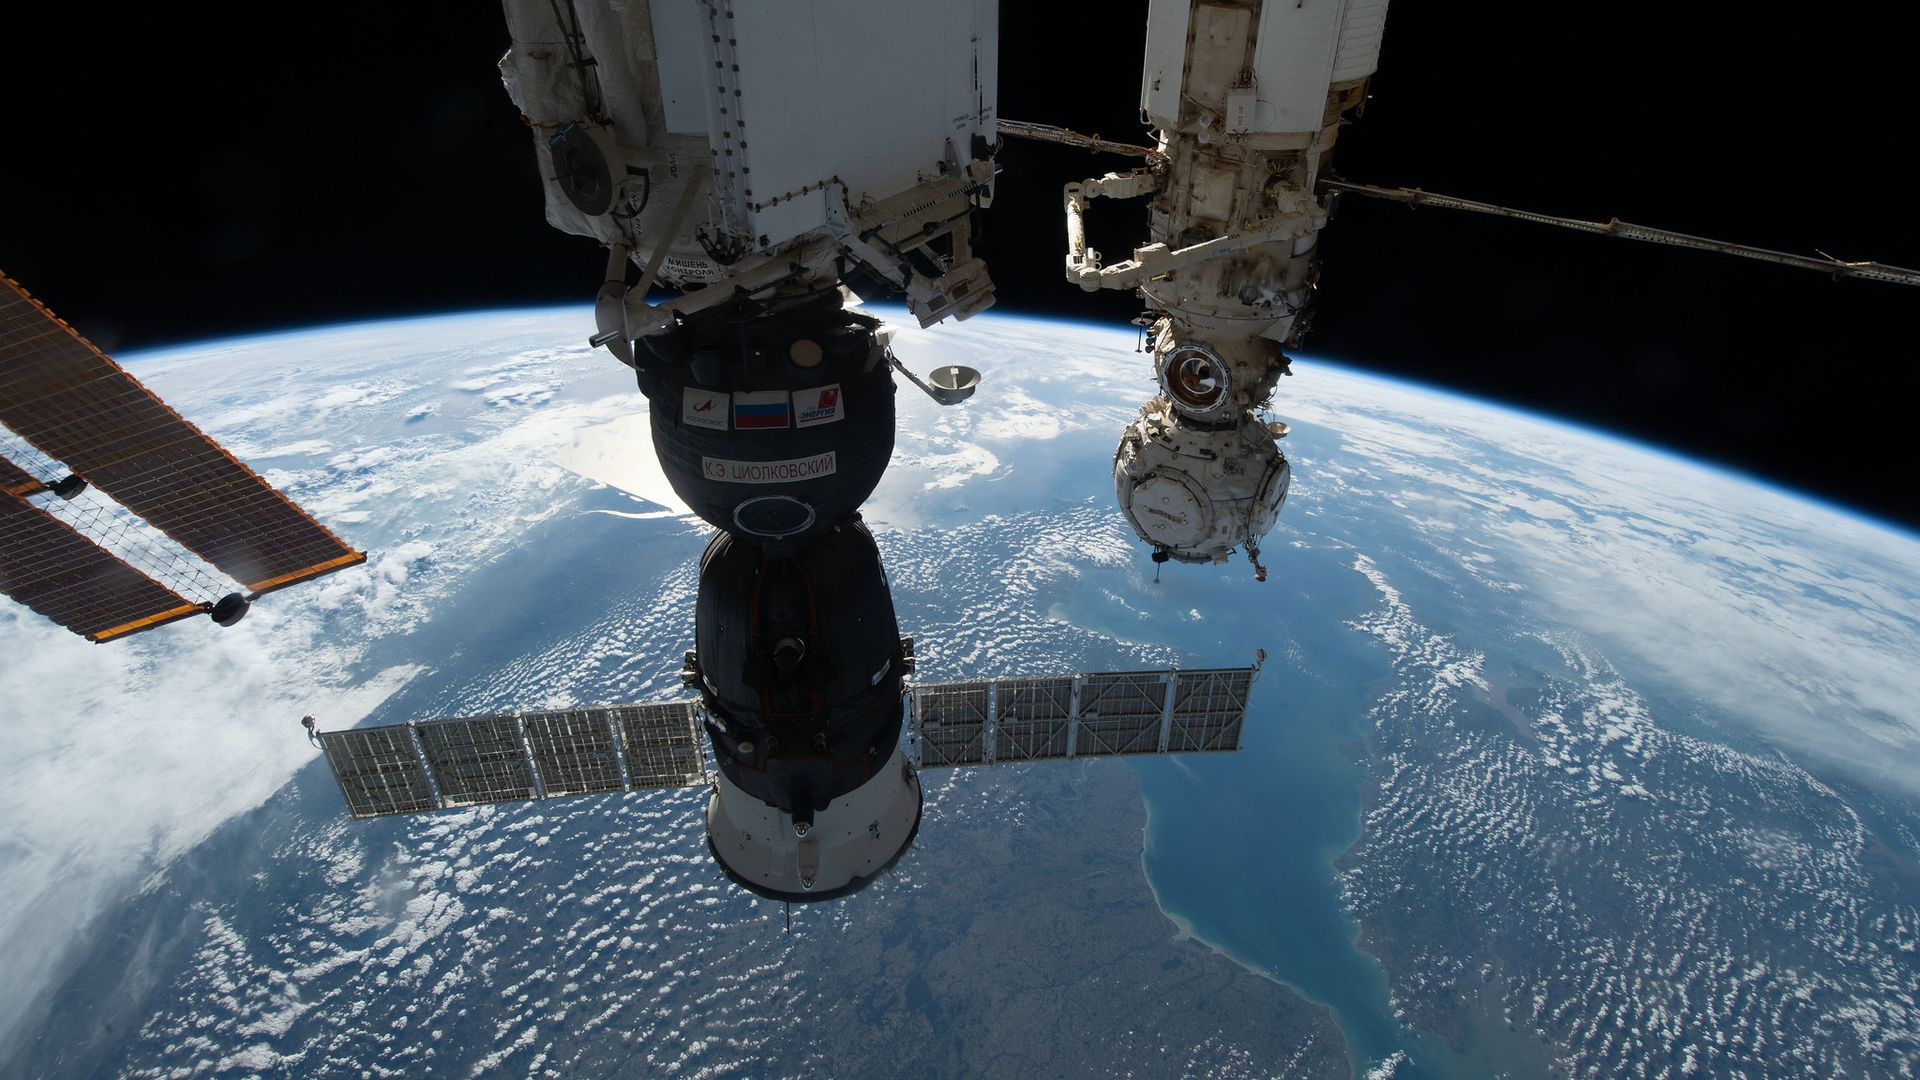 A Soyuz spacecraft attached to the International Space Station above the Earth